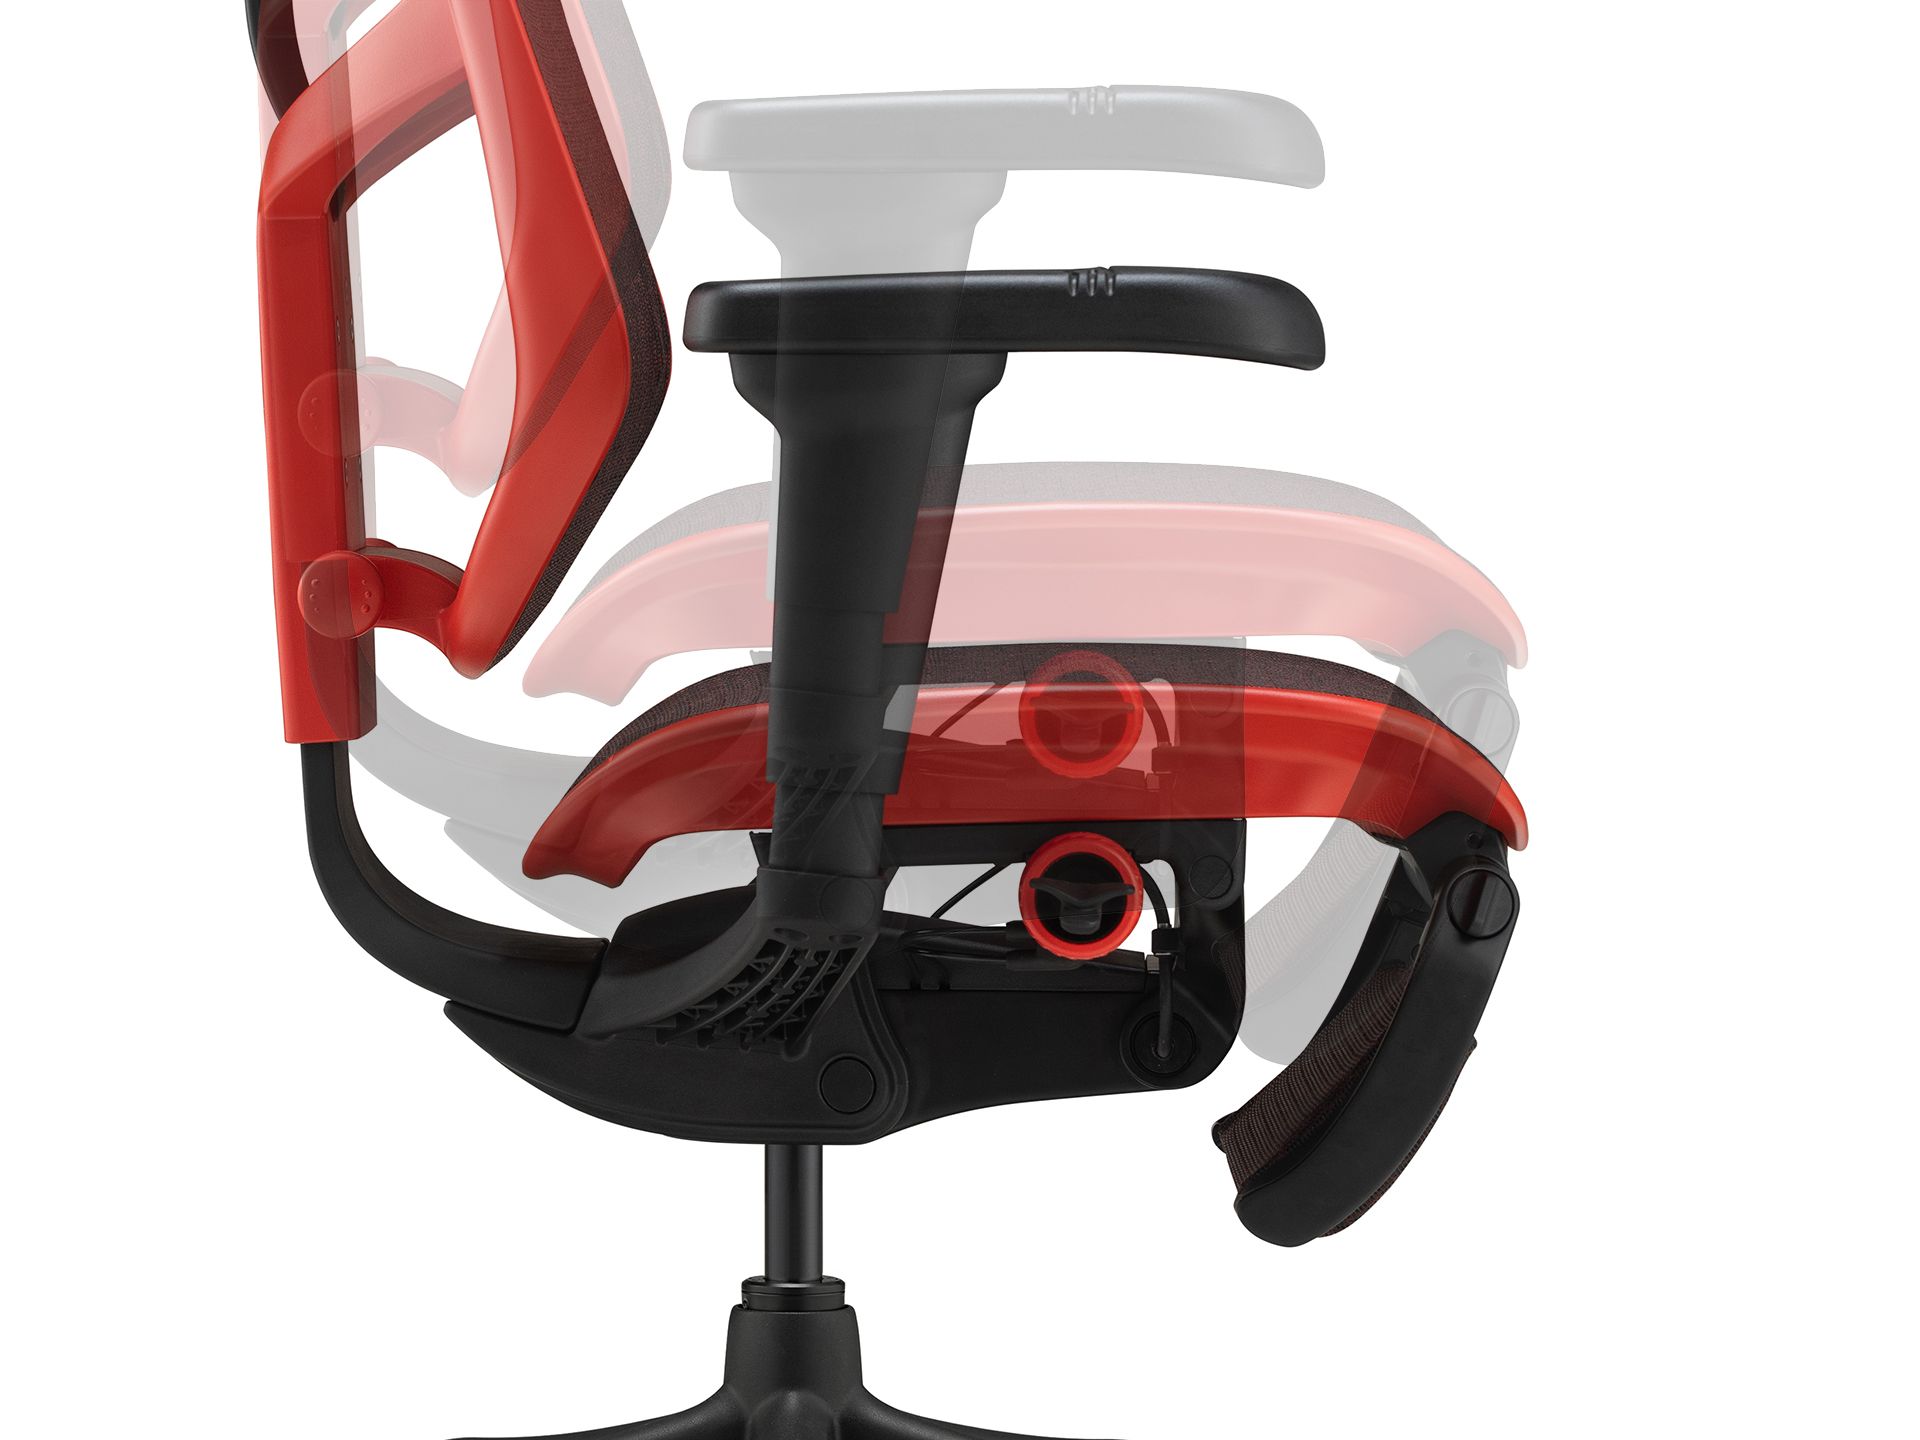 Enjoy Ultra profile view of the seat, showing how the height can be adjusted to go lower and higher. 